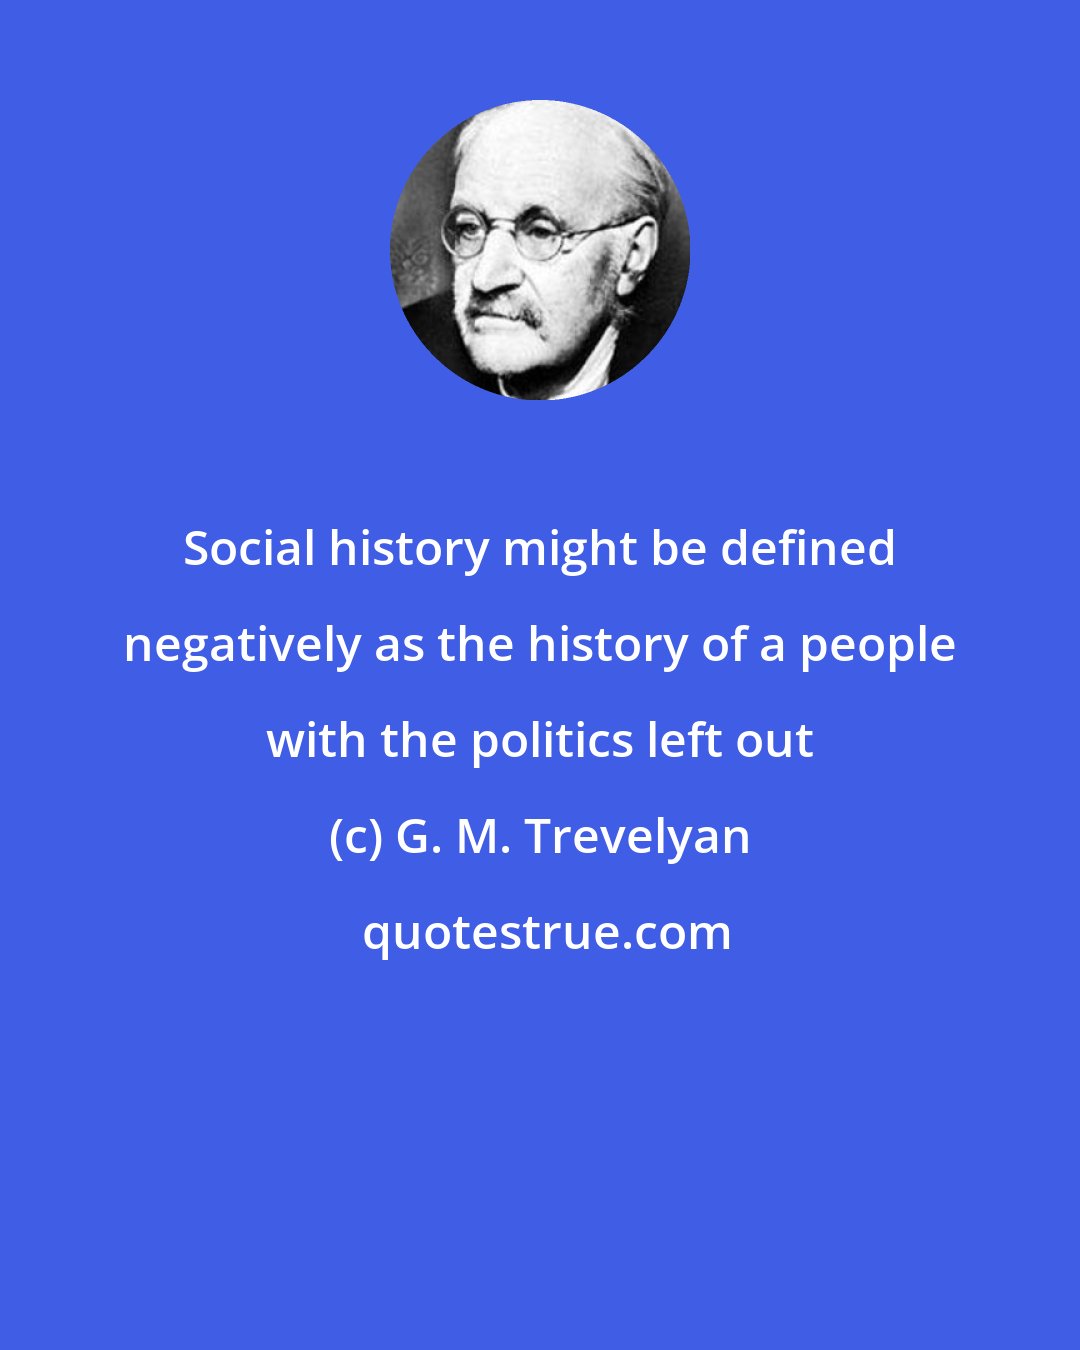 G. M. Trevelyan: Social history might be defined negatively as the history of a people with the politics left out